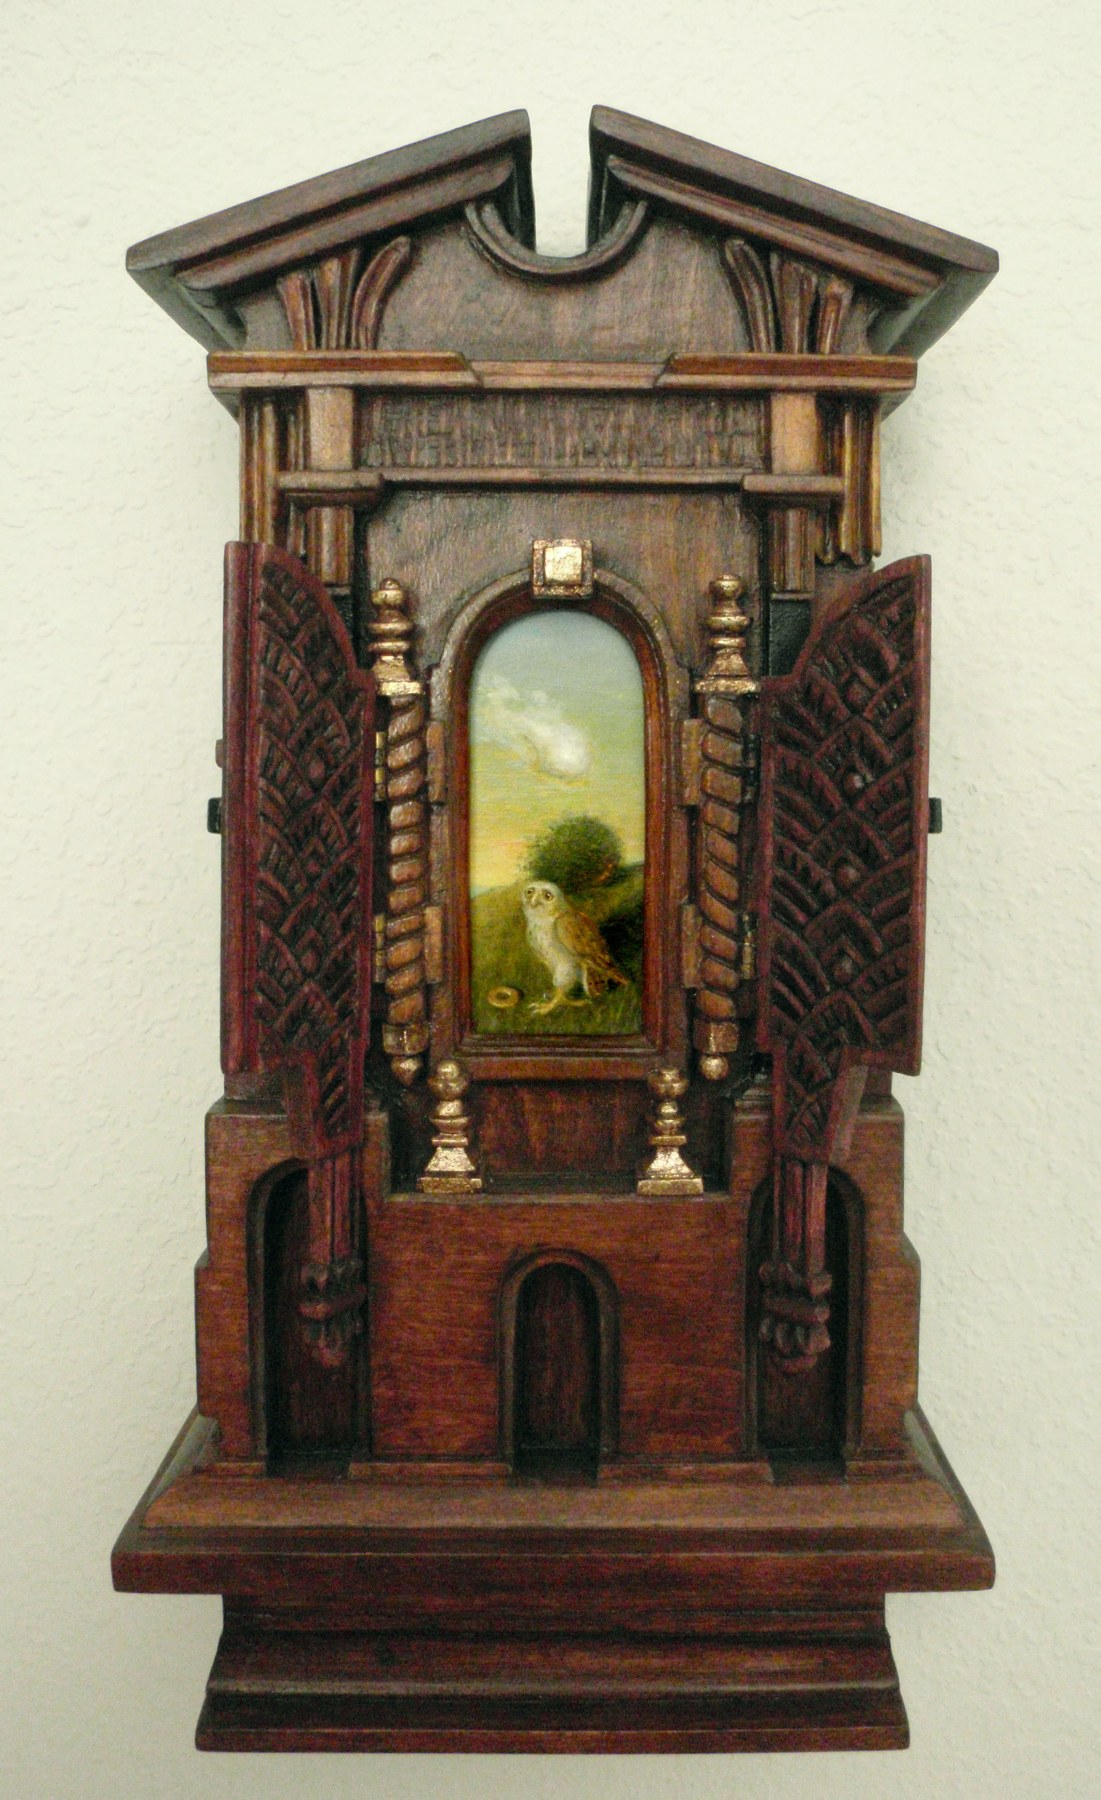 Holly Lane, Mindful Fledgling Rethinking Its Dietary Choices, 2010, acrylic and carved wood, 12 1/4 x 6 1/2 x 3 3/8 inches